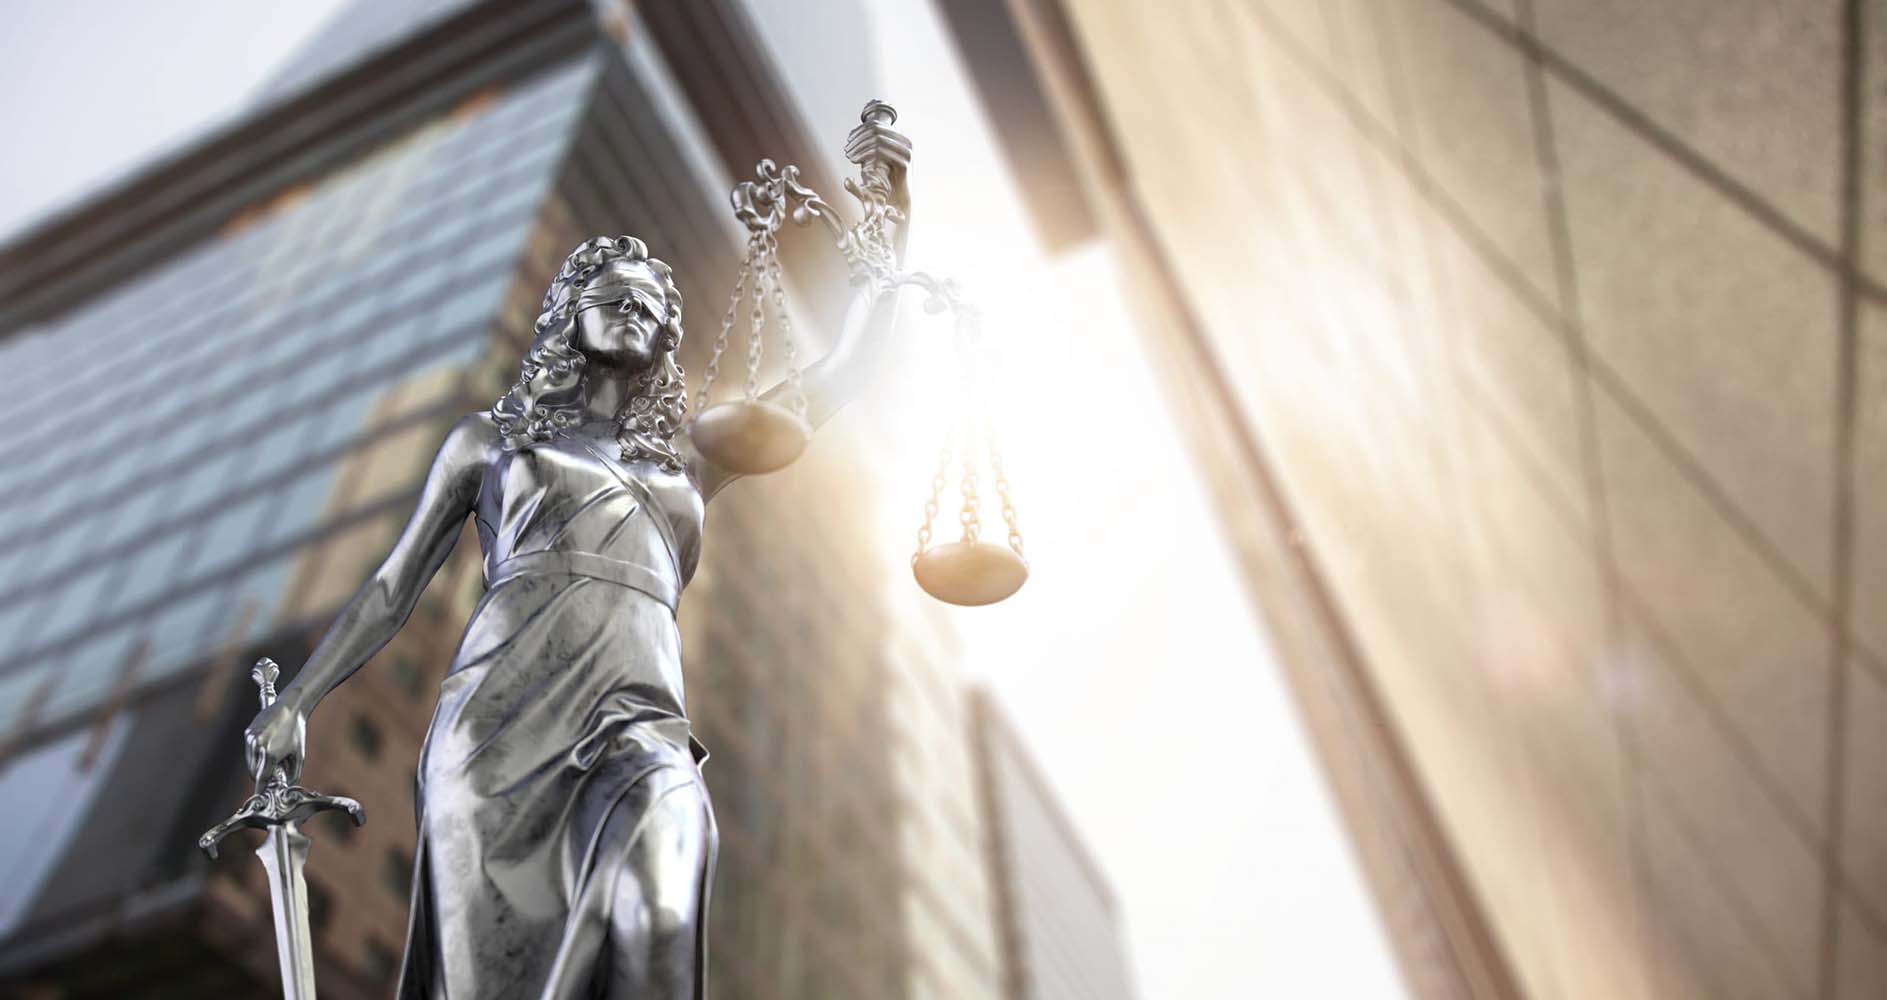 Image of the scales of justice silhouetted against buildings and the sun.